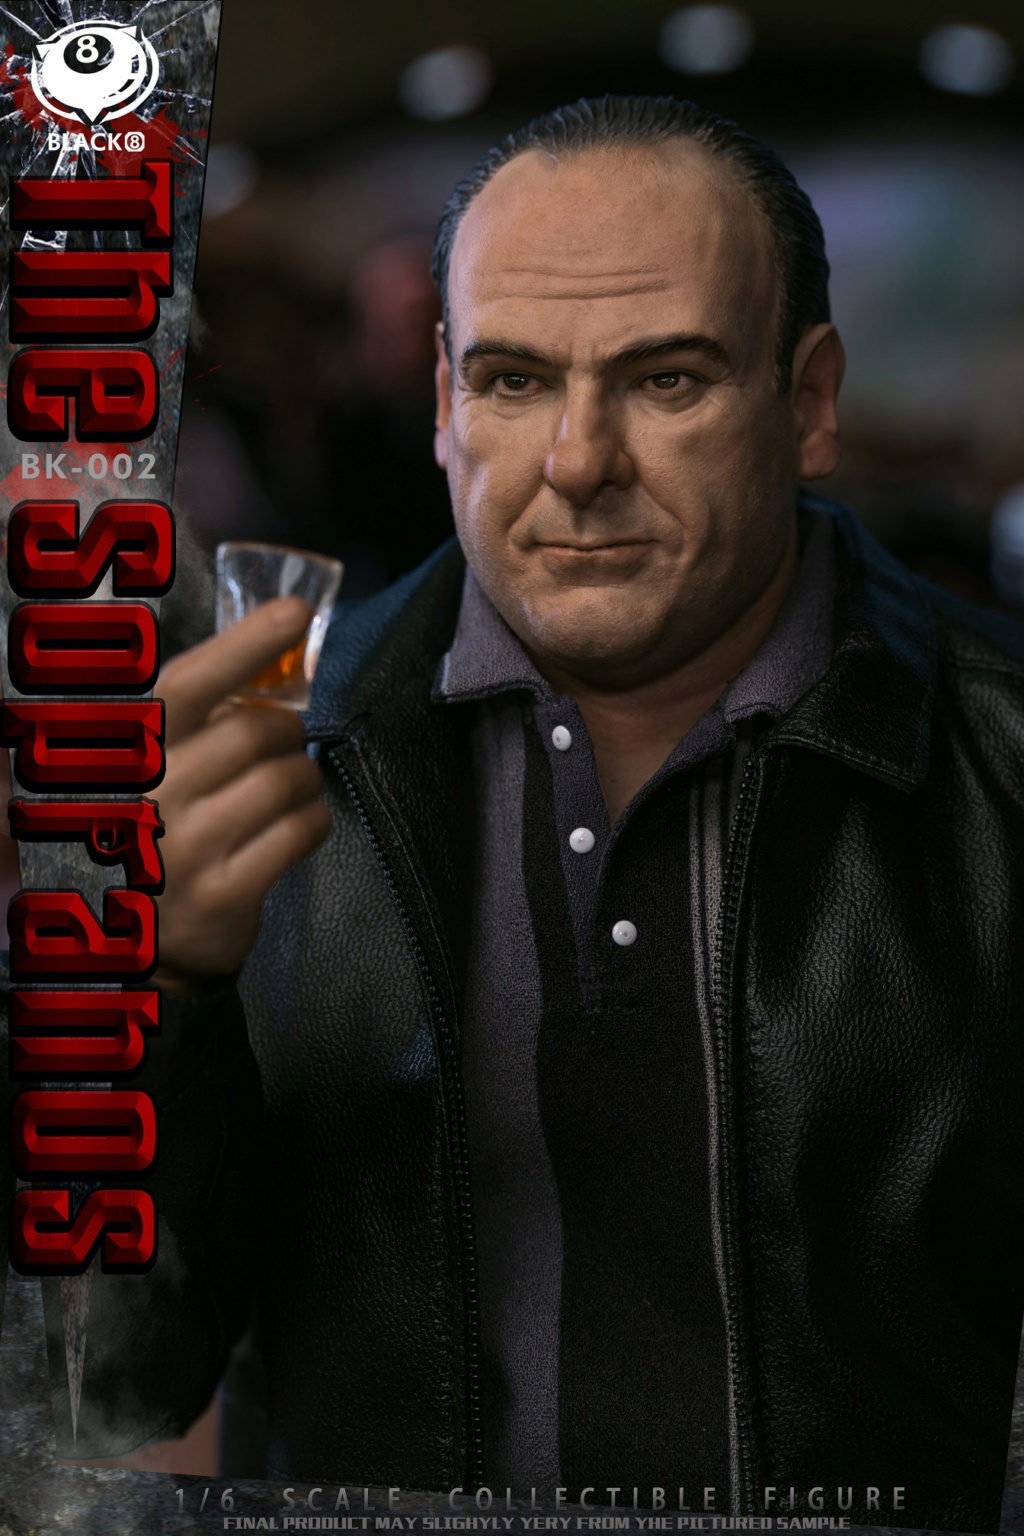 cableTV-based - NEW PRODUCT: BLACK 8 STUDIO: 1/6 "The Sopranos" Collection Doll#BK-002 16110512